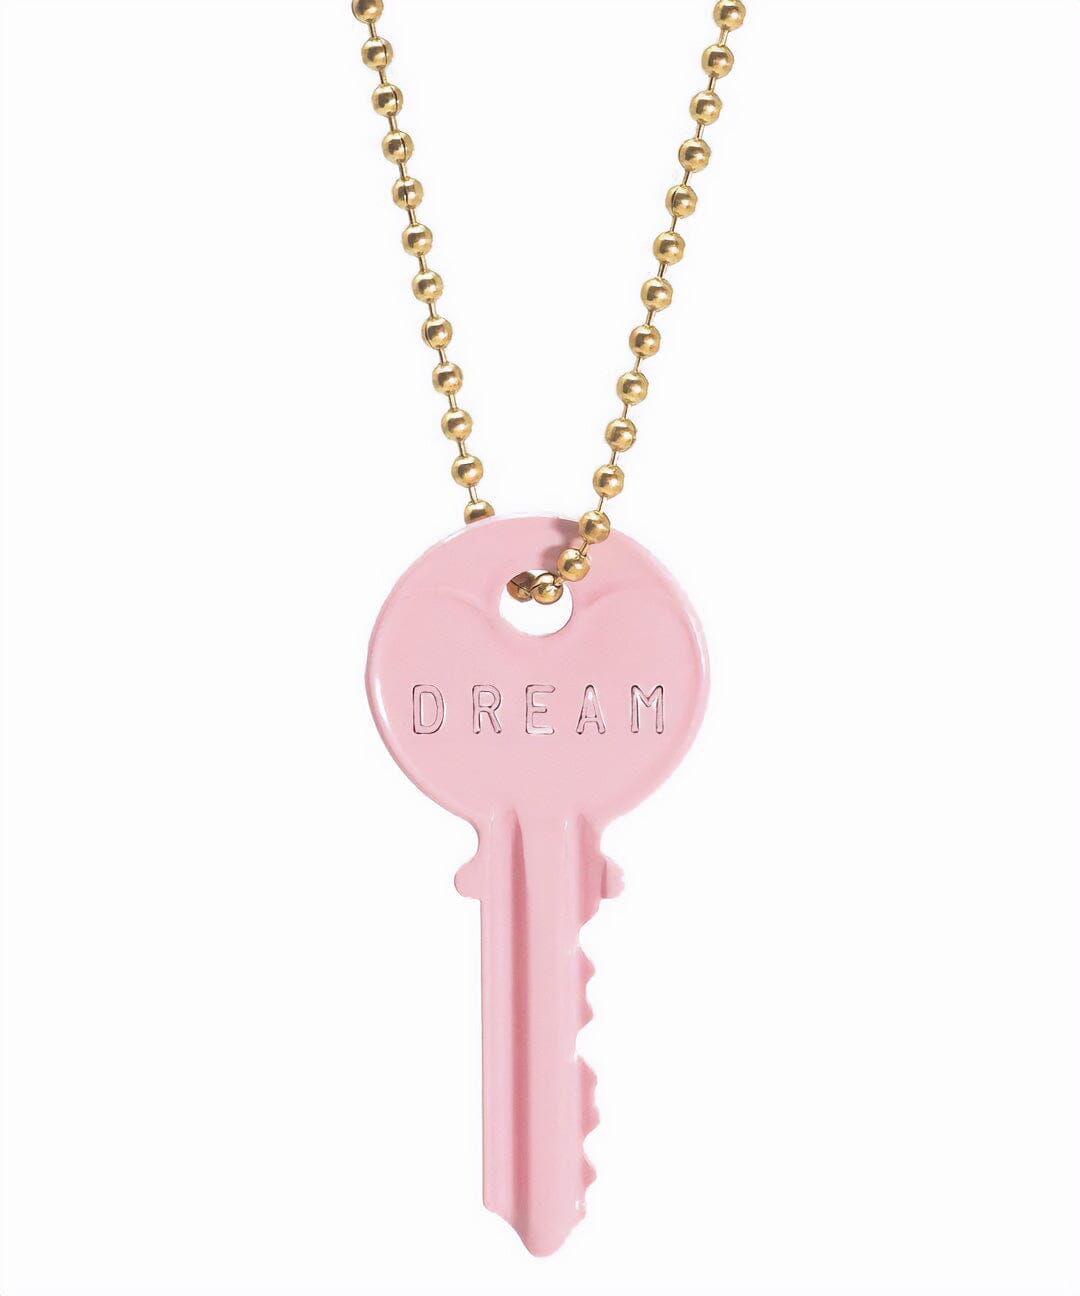 Pastel Pink Classic Ball Chain Key Necklace, Gold